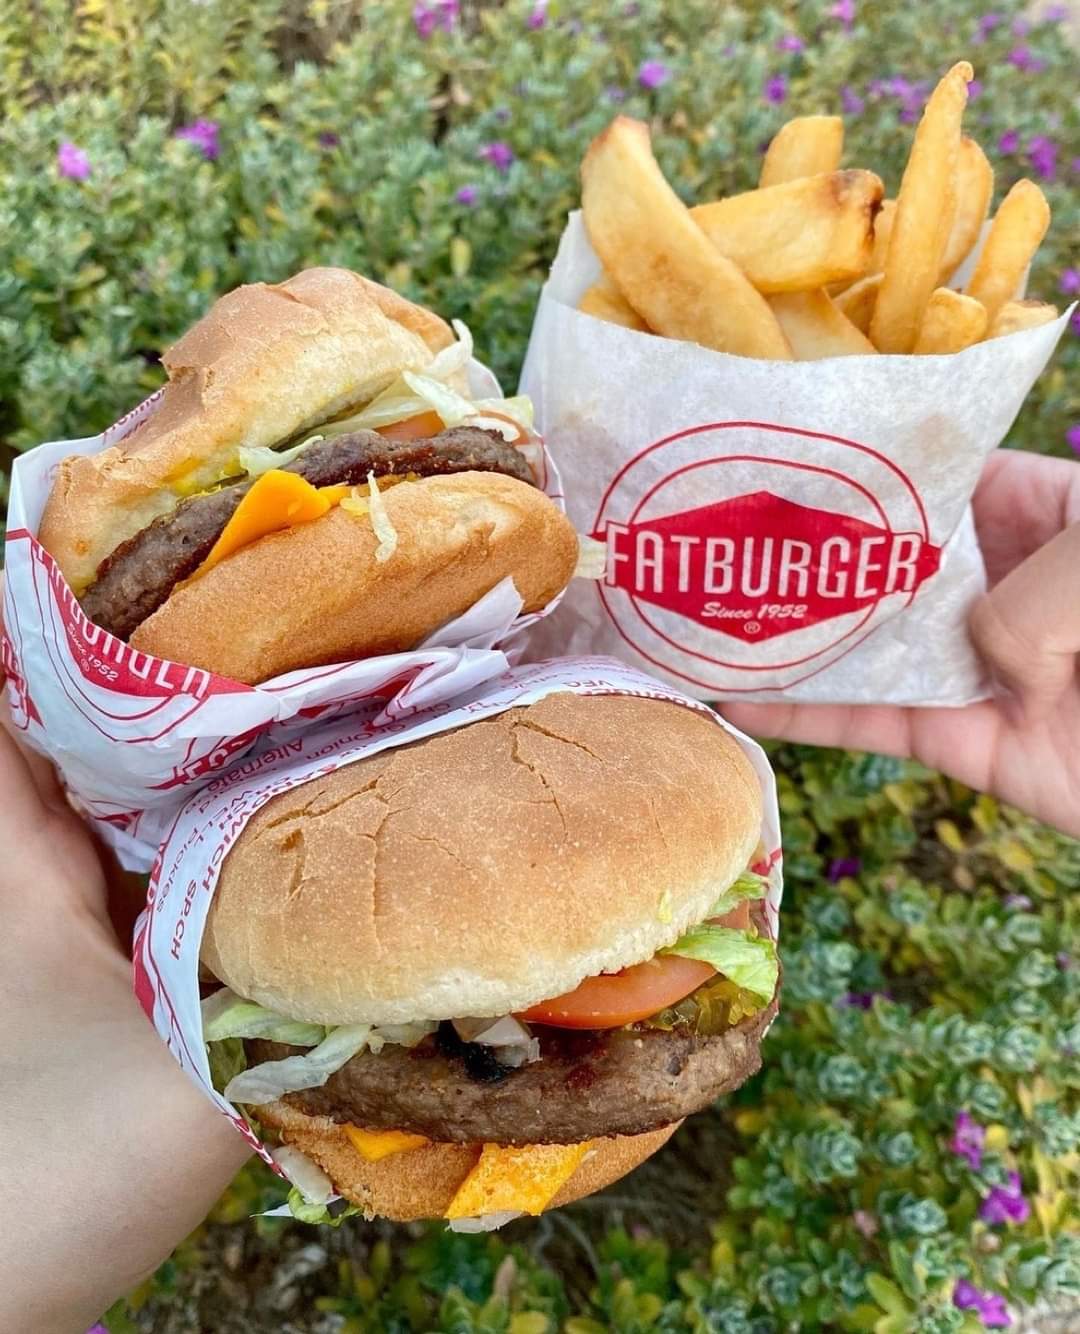 Person holding vegan burgers and fries from Fatburger